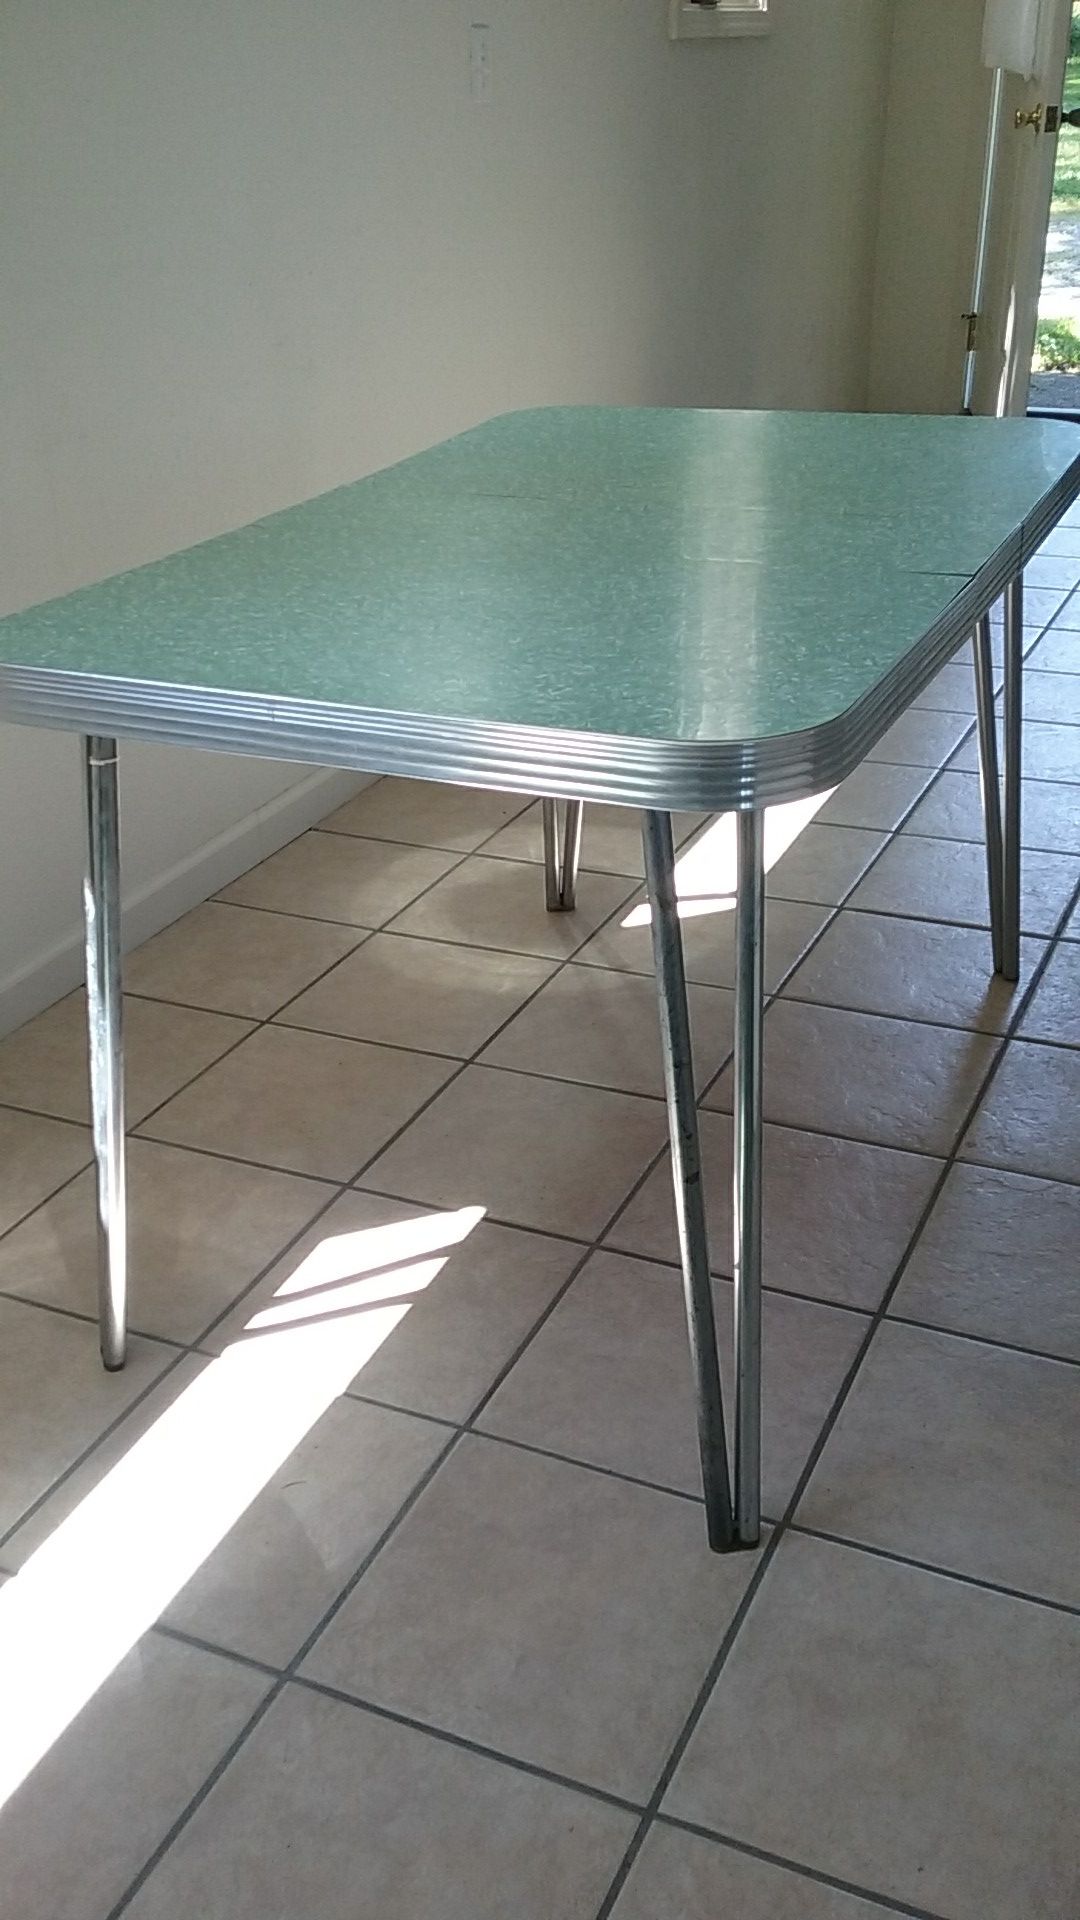 1950's Formica table